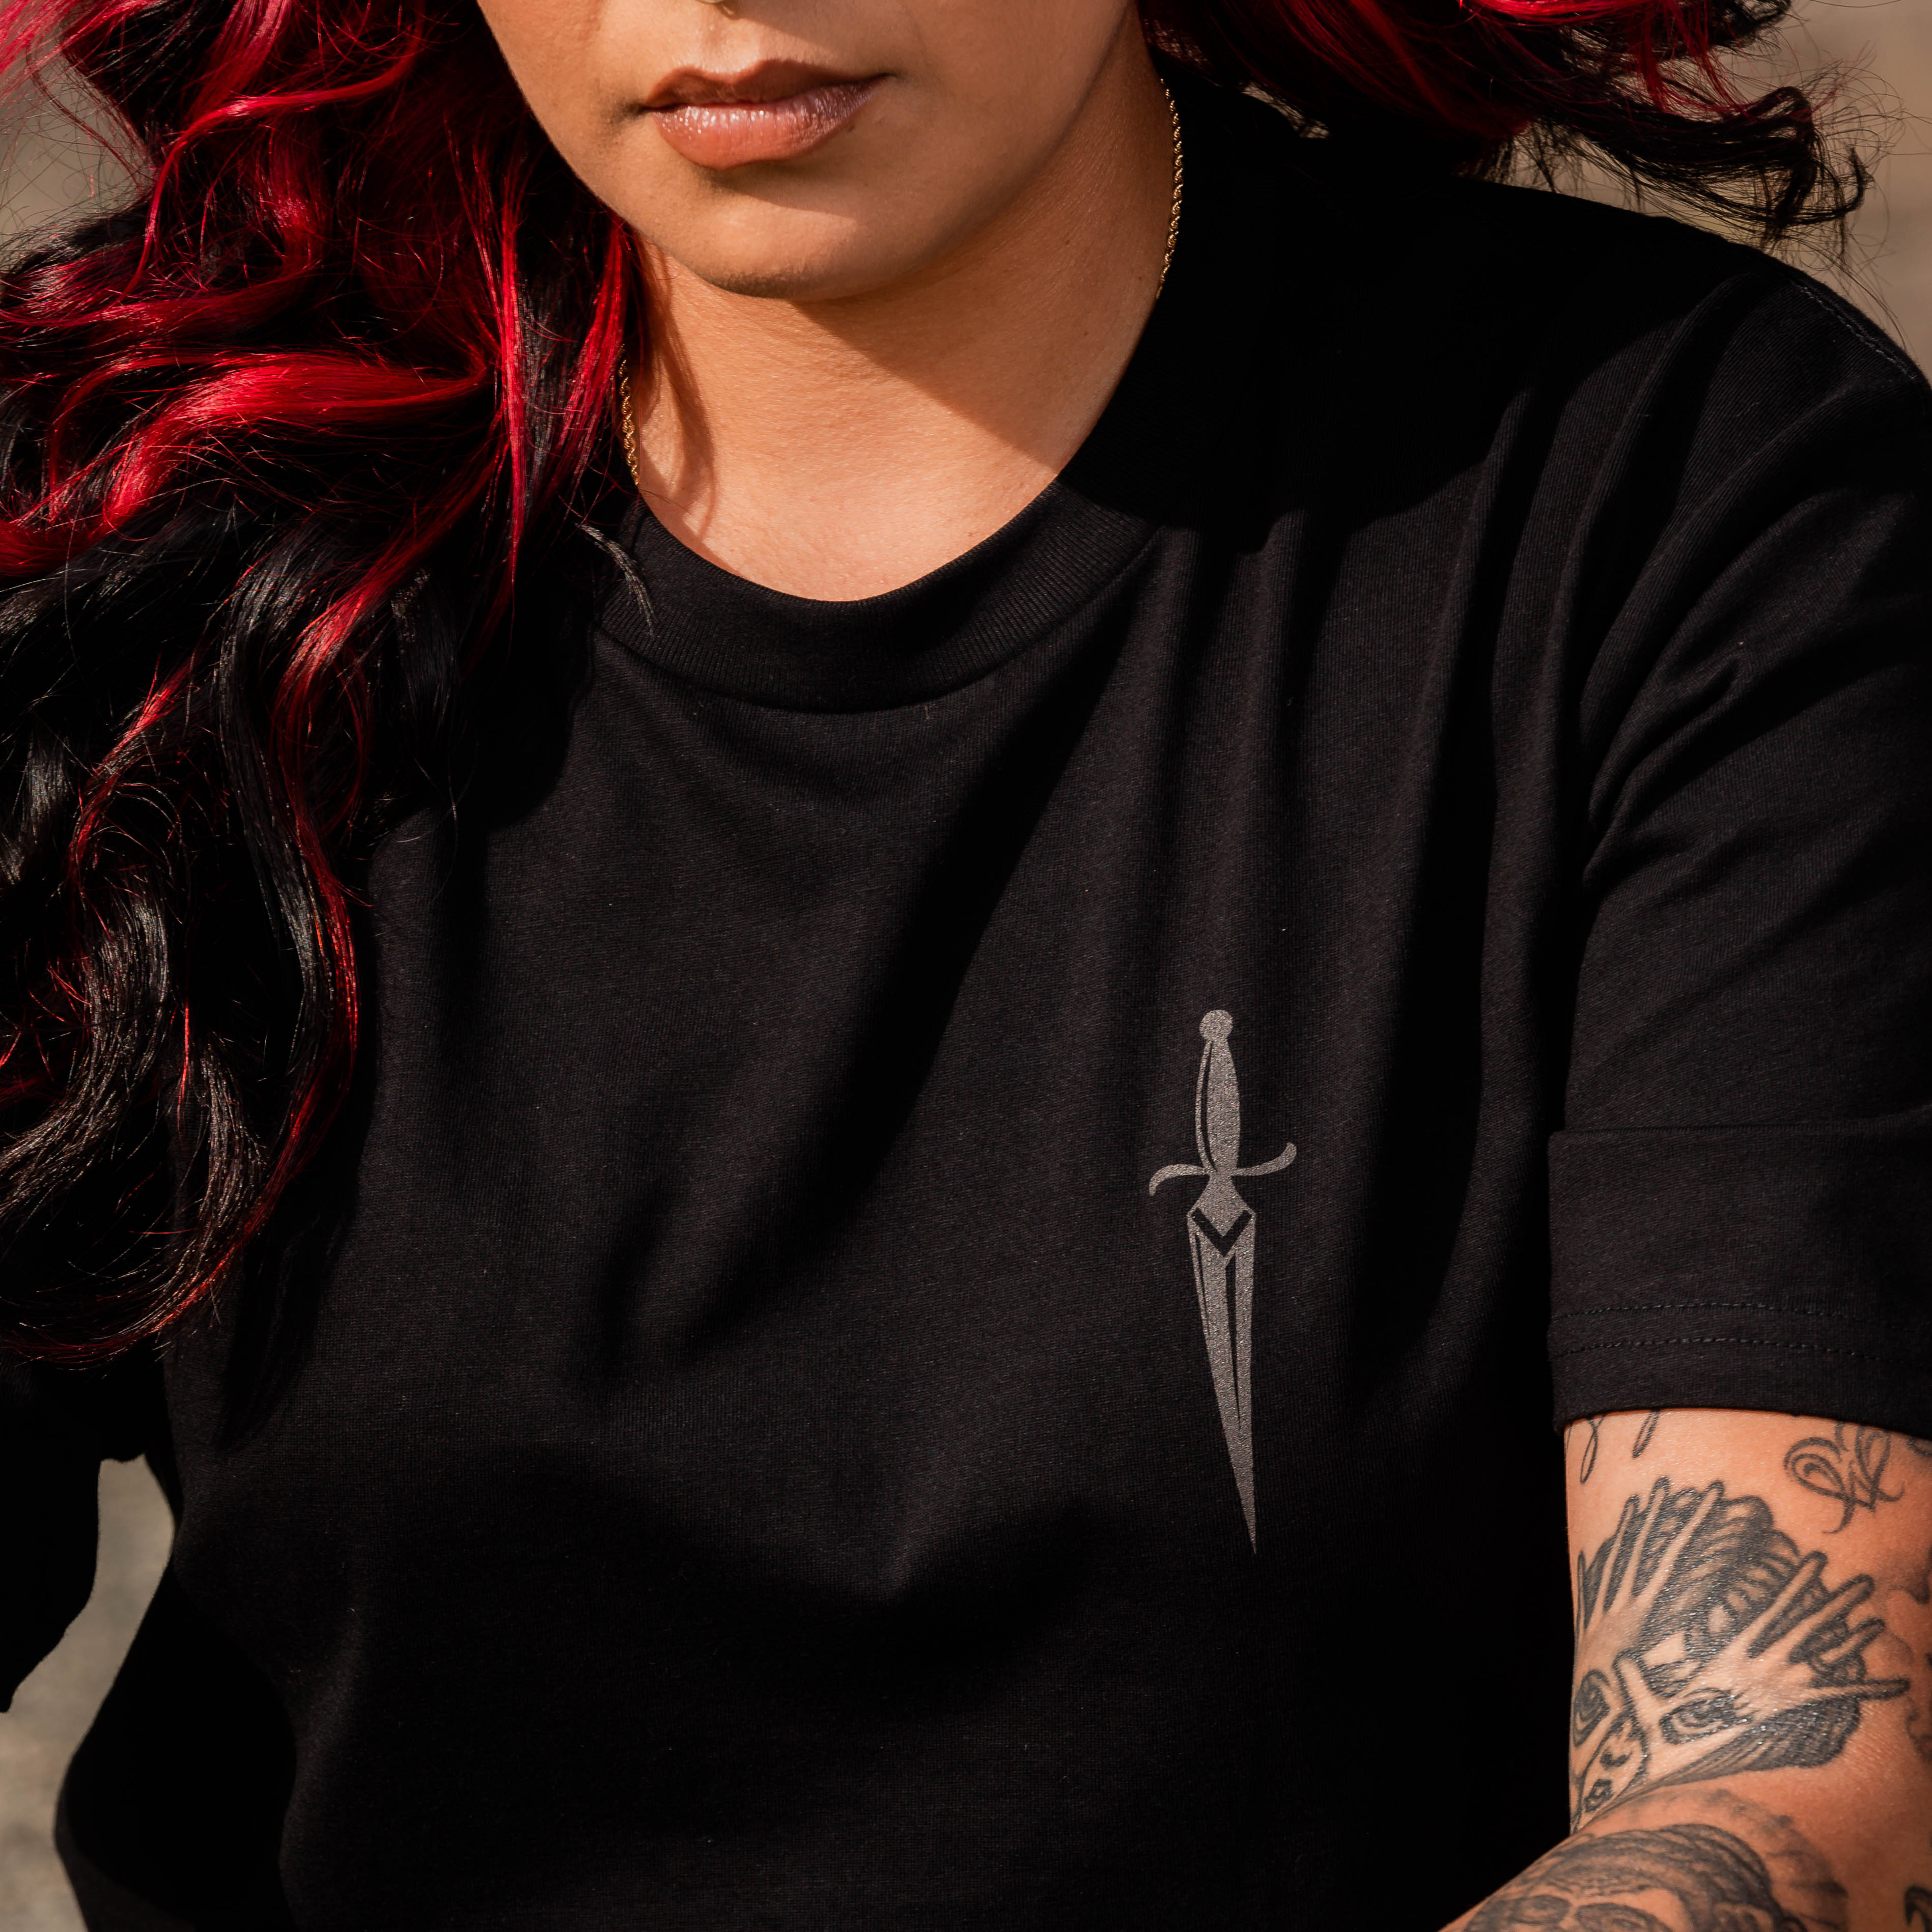 Woman with black and red long hair and tattoos wearing black tee  with dagger front left chest print.